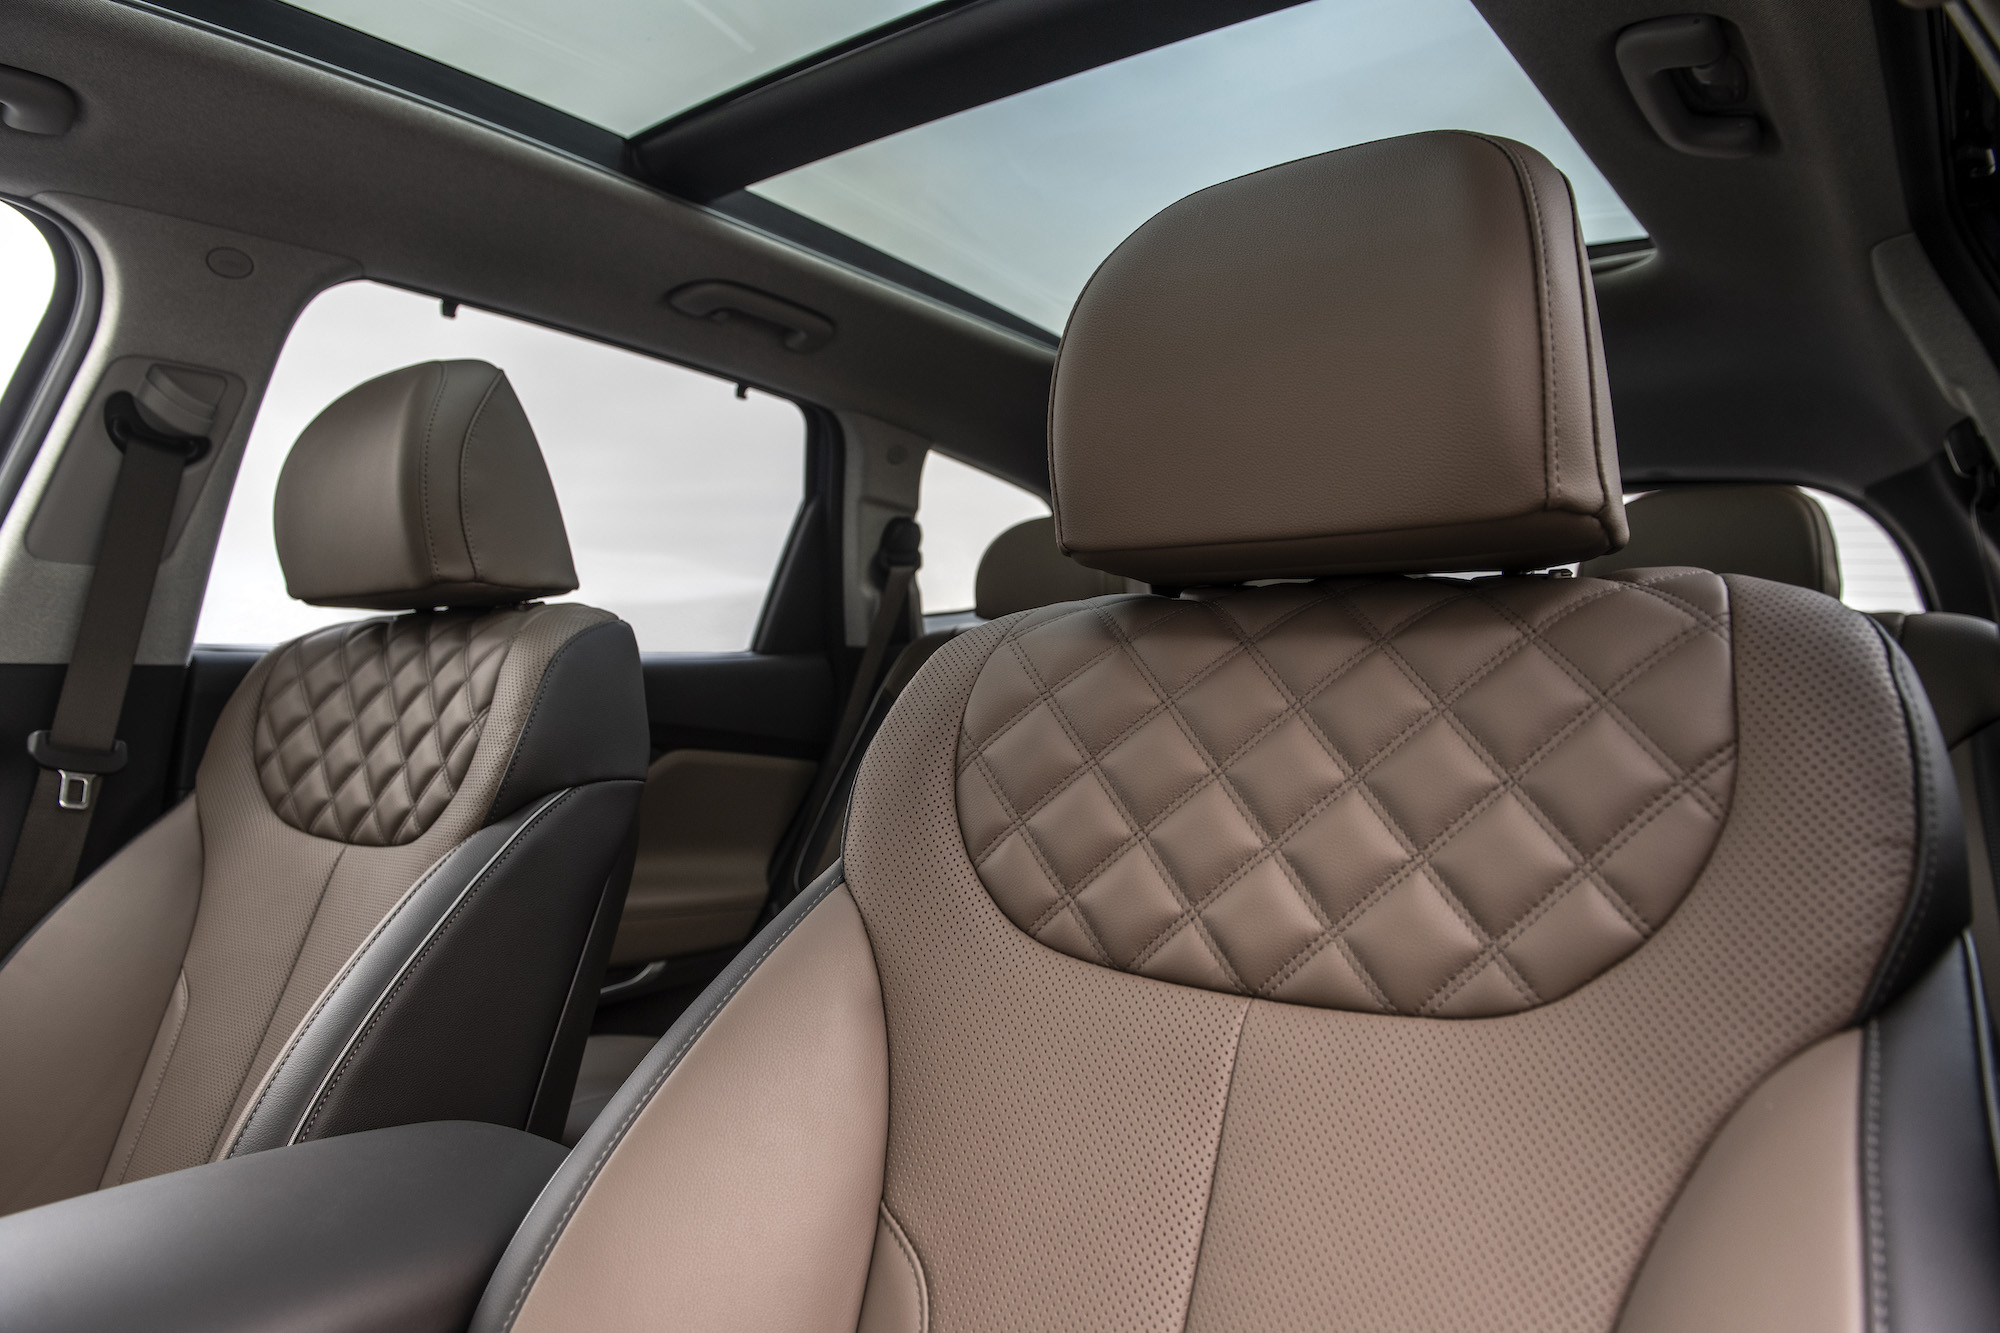 An interior photo of the tan leather front seats and panoramic sunroof of a 2021 Hyundai Santa Fe midsize SUV